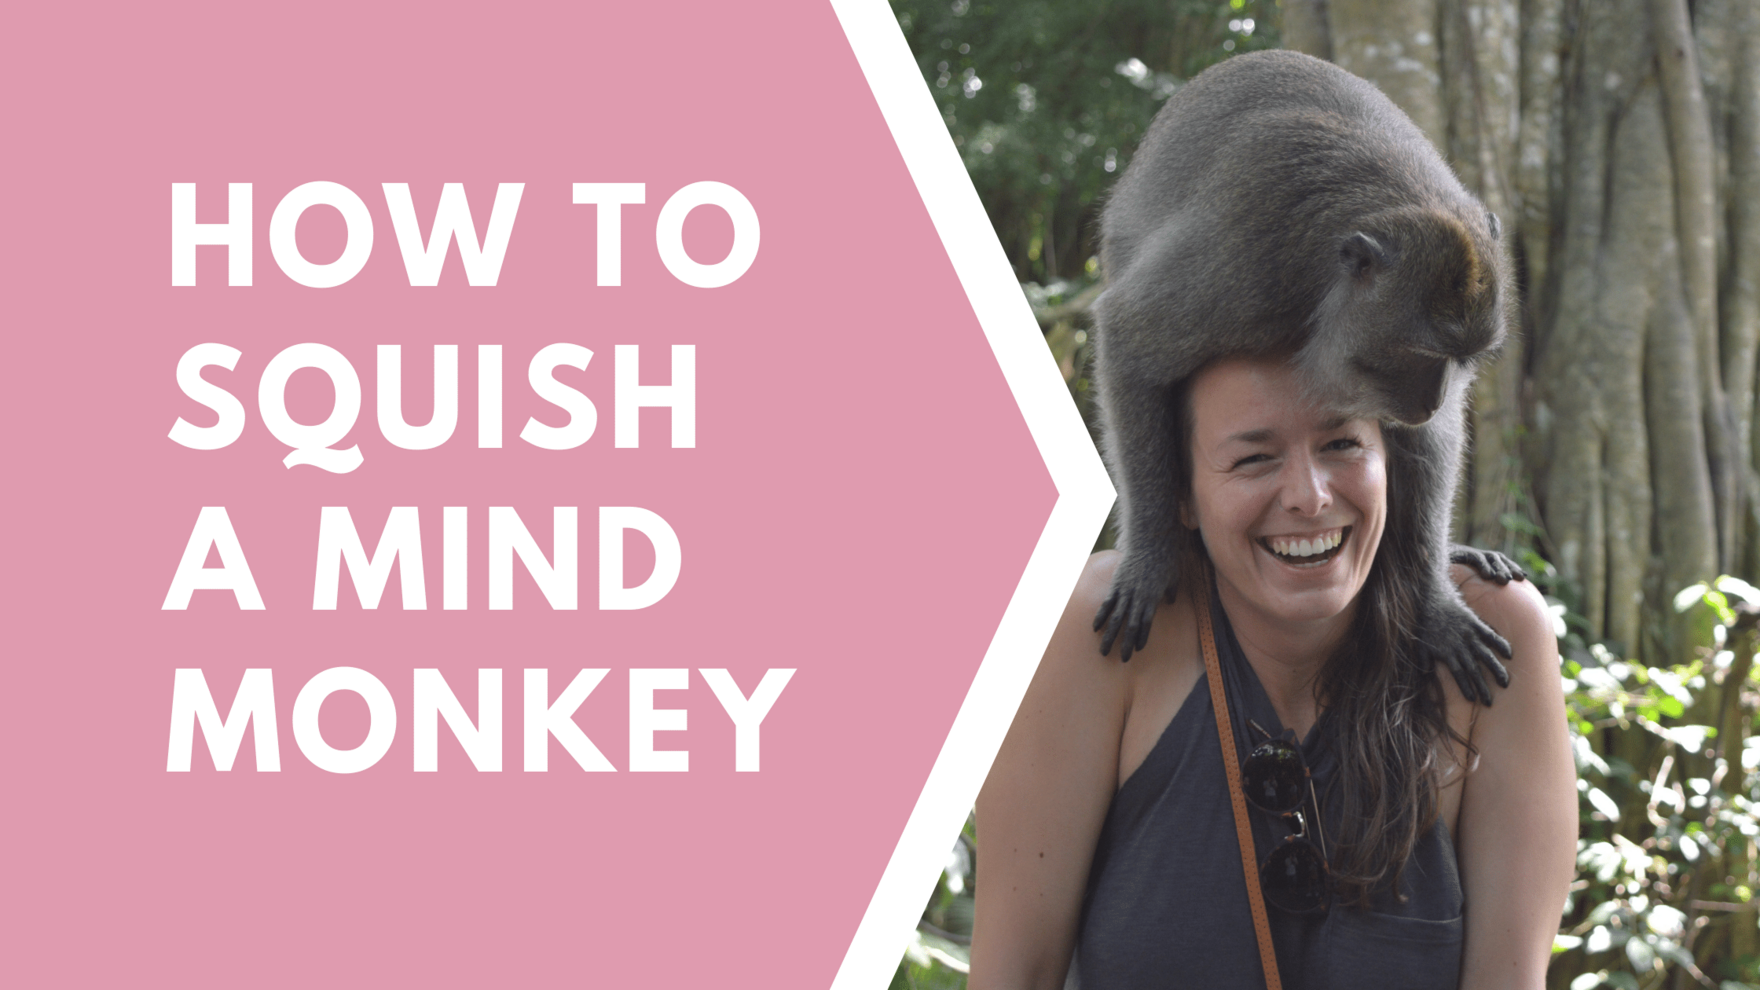 HOW TO SQUISH A MIND MONKEY (1)